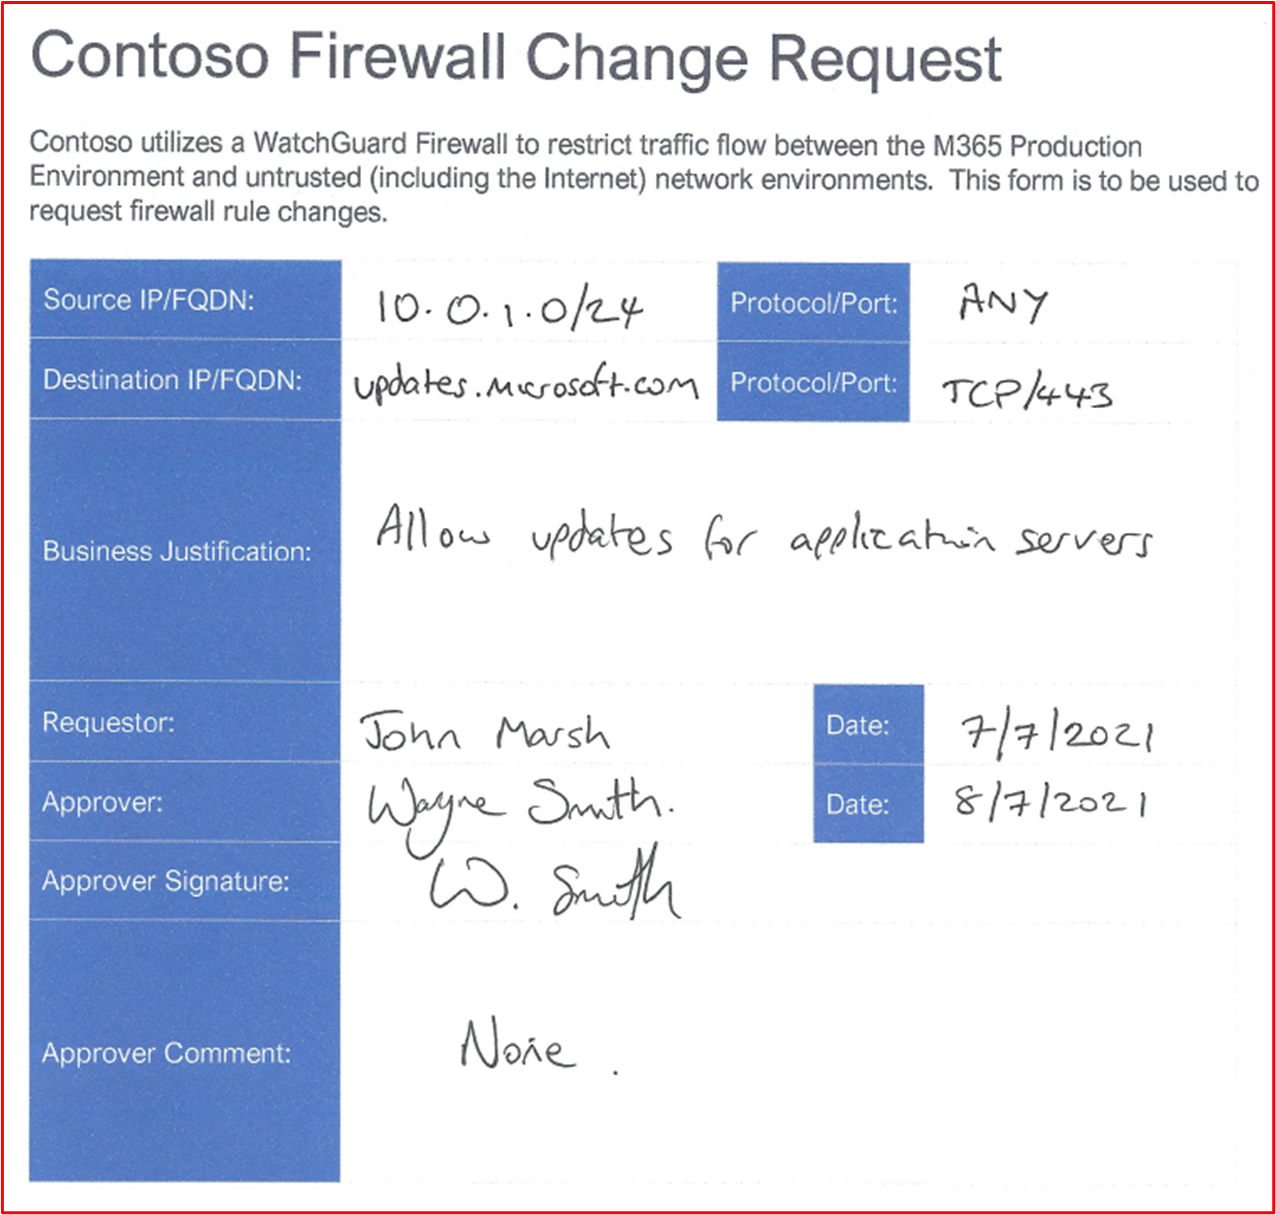 screenshot shows a firewall rule change being requested and authorized using a paper-based process